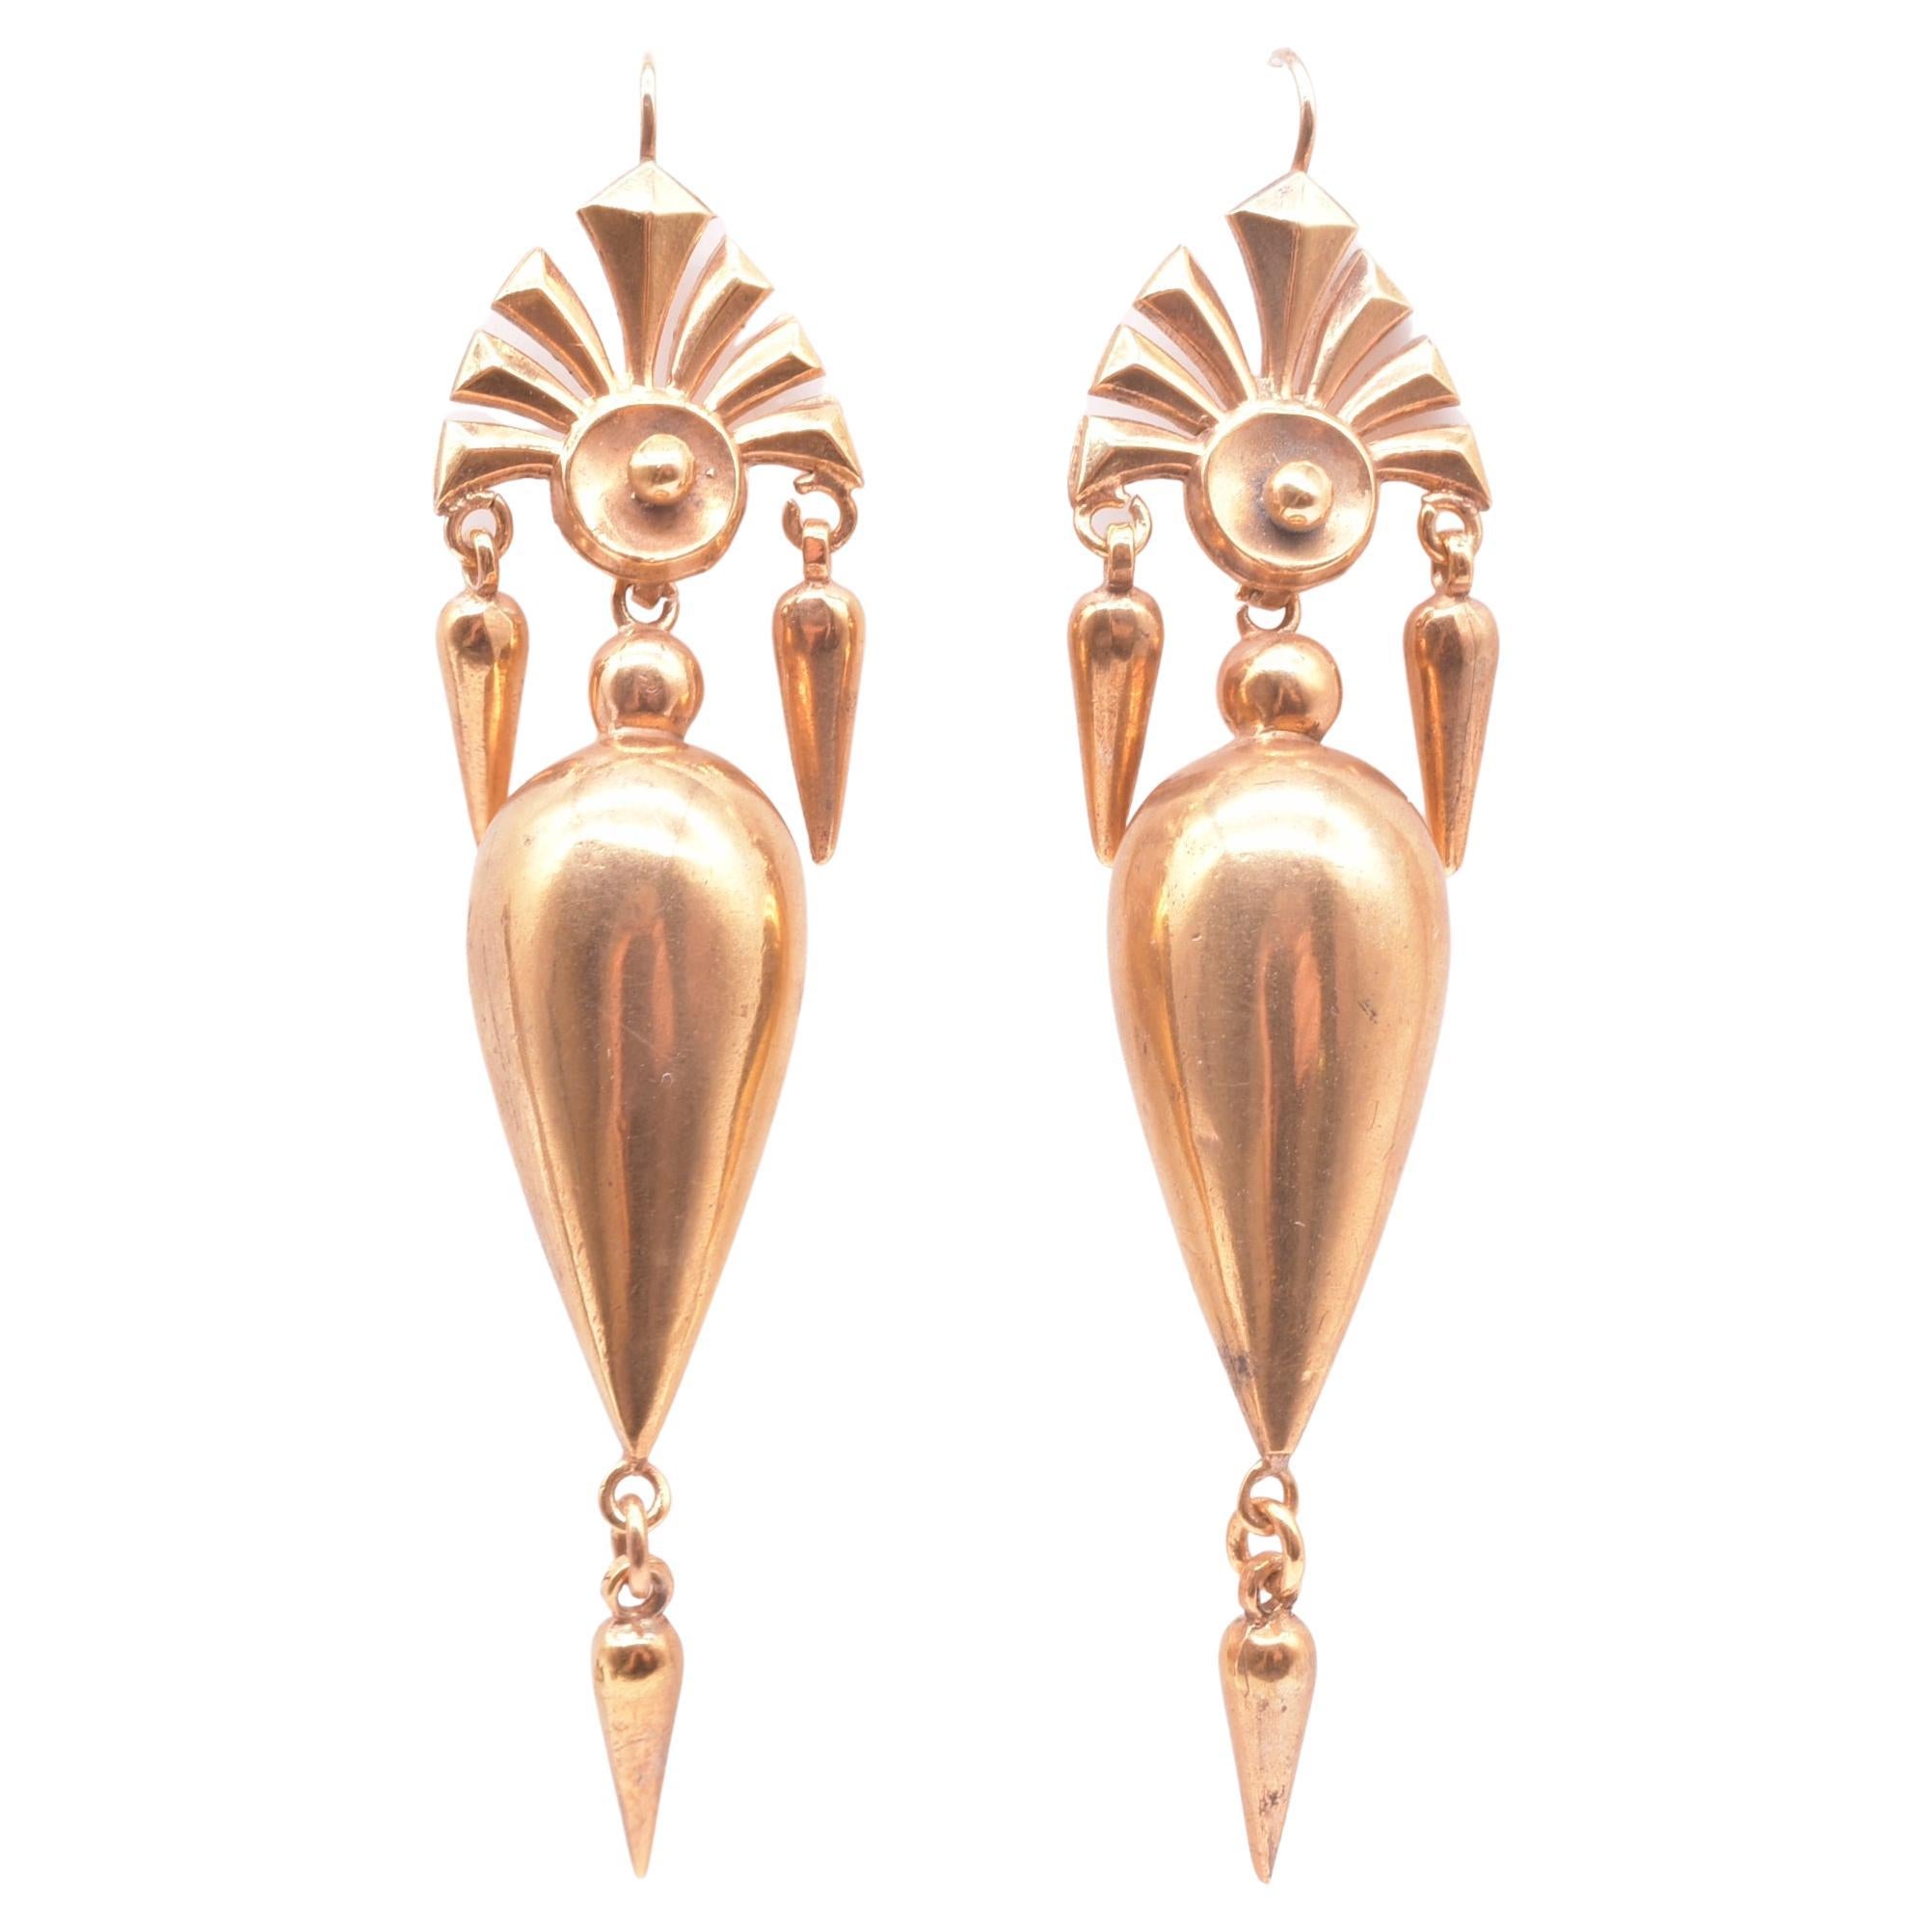 Our C1870 gold filled drop earrings were crafted following the newly discovered ancient works of art at Pompeii and Herculaneum. The influence of the discovery of the archeological sites compelled society to adorn themselves with  jewelry in the